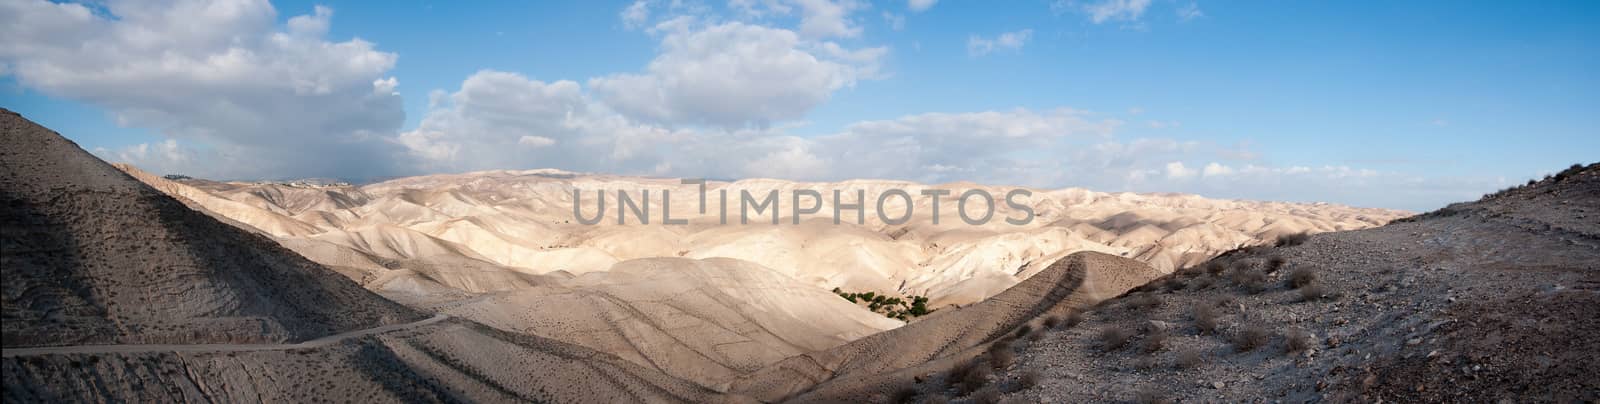 Judean desert in israel attraction for tourists